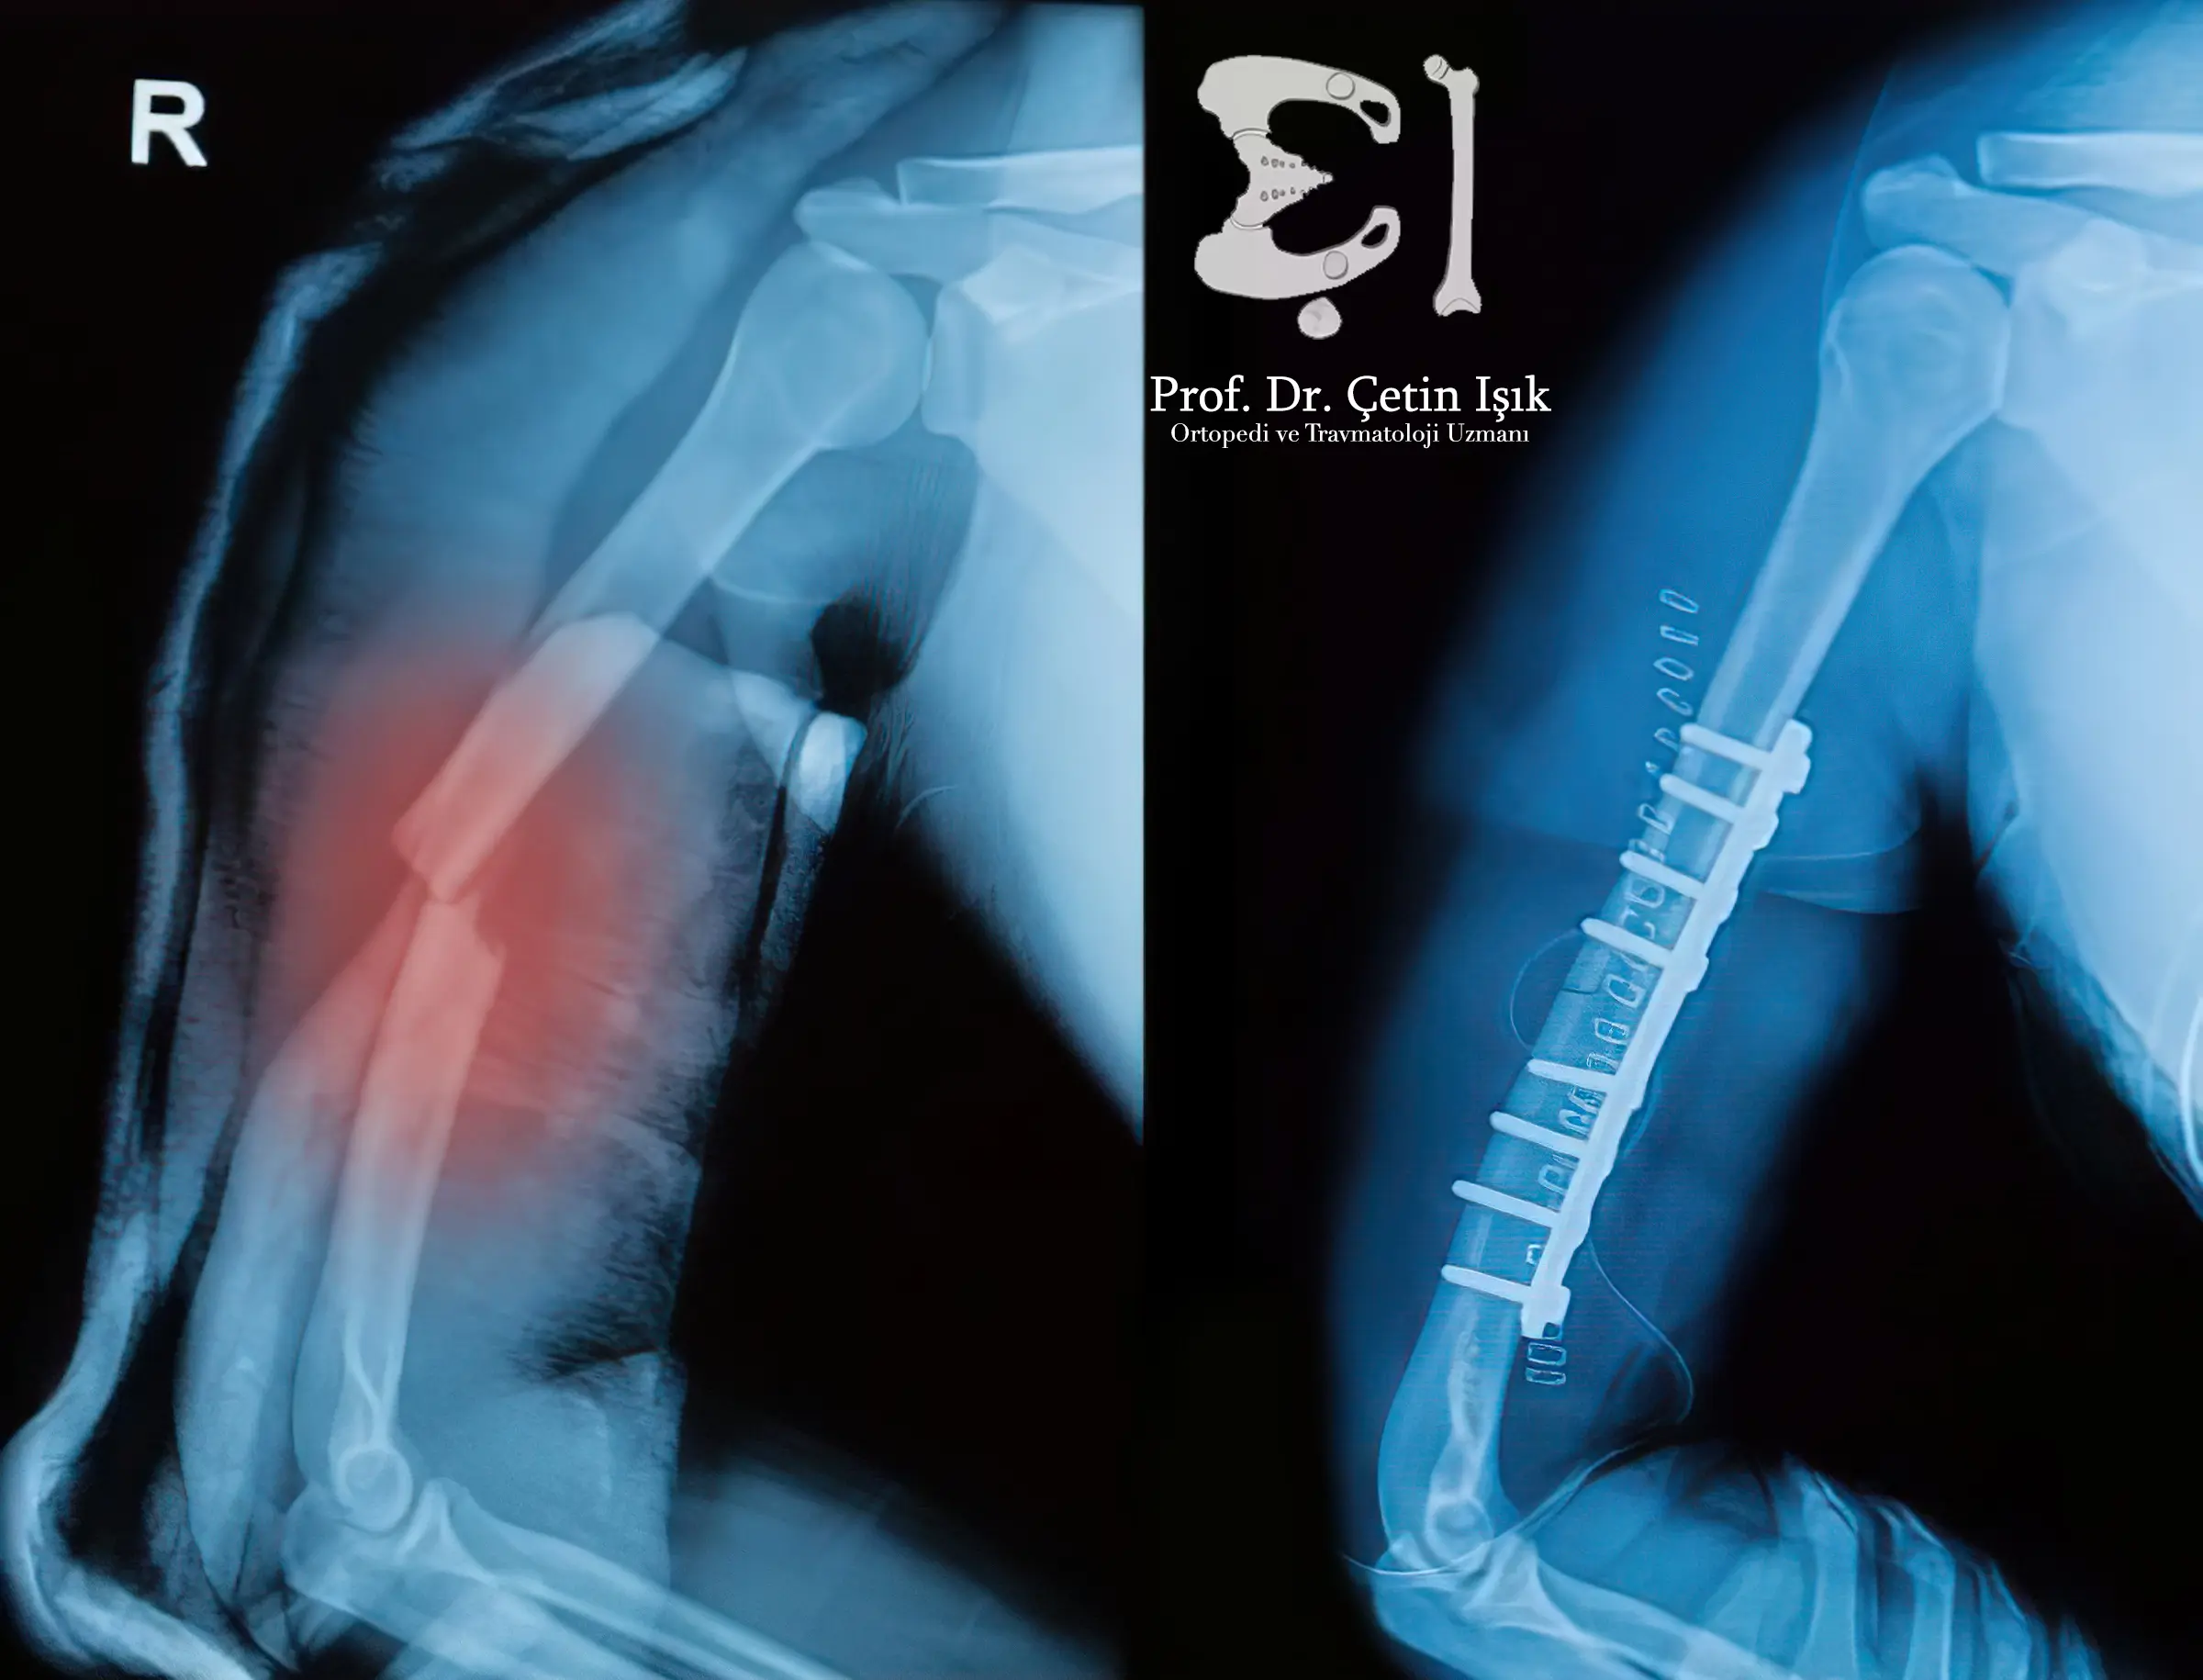 Image showing the internal fixation procedure for a humeral body fracture using plates and screws